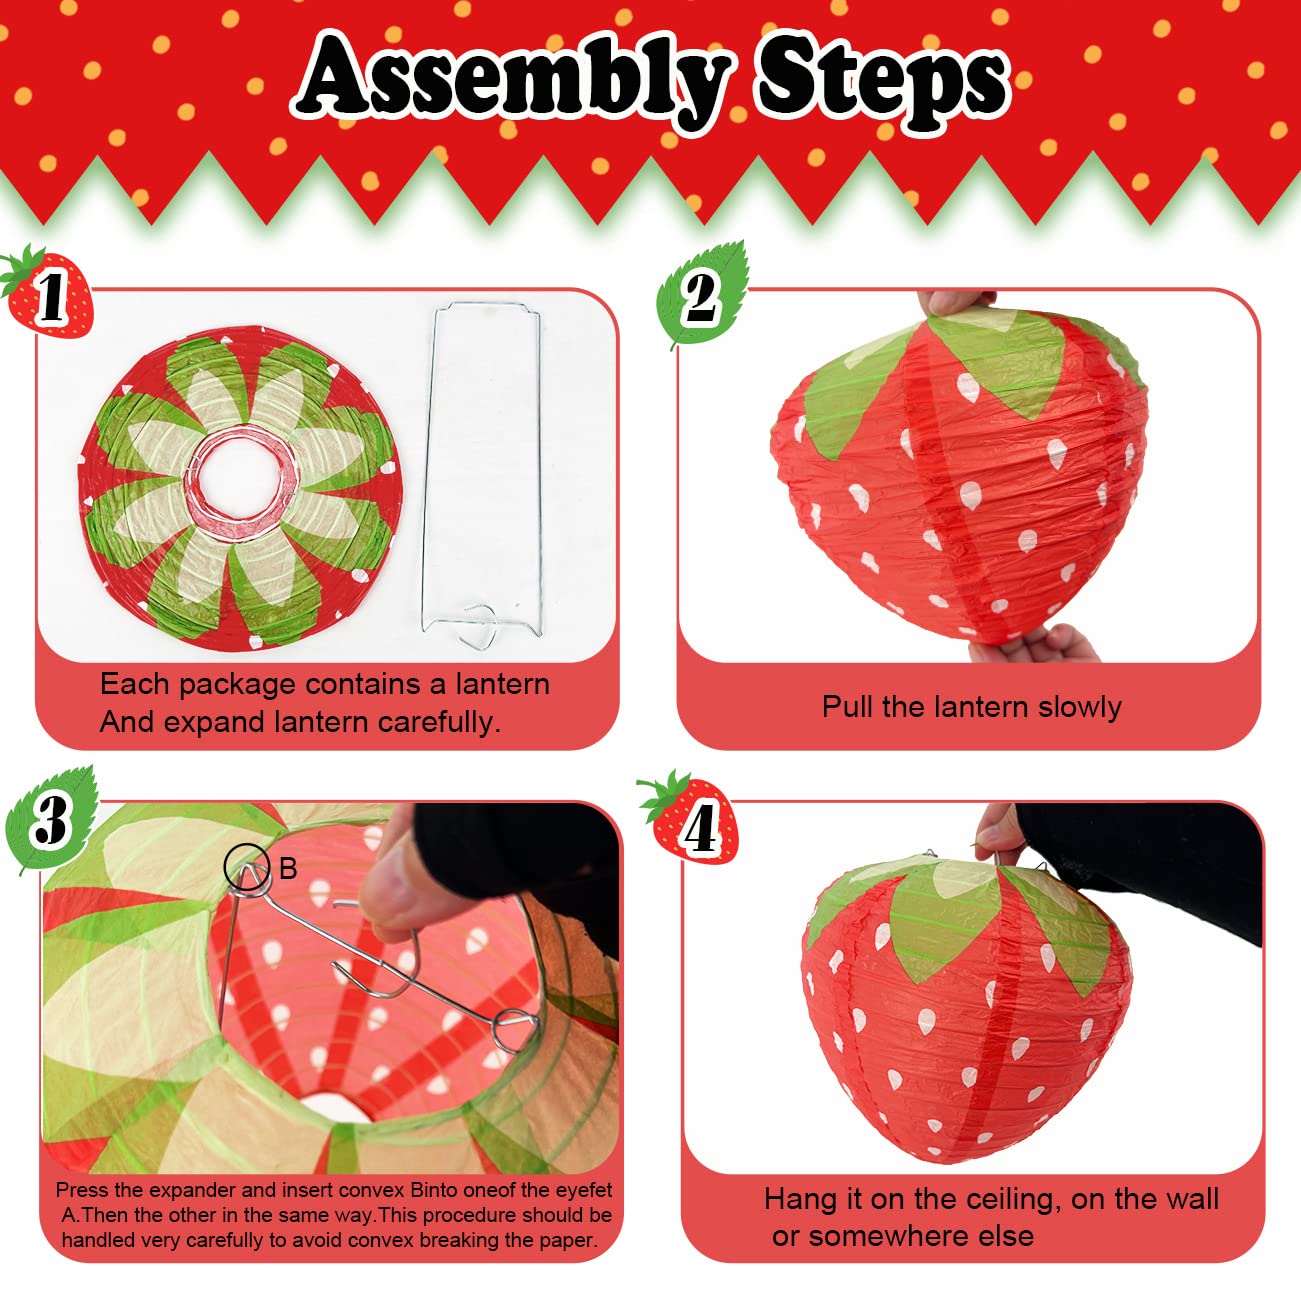 Strawberry Birthday Party Decorations Set Include Strawberry Shortcake Birthday Banner Cake Toppers Balloons Paper Pompoms and Fans for Kids Girl Berry Sweet Themed Birthday Party Supplies Decor